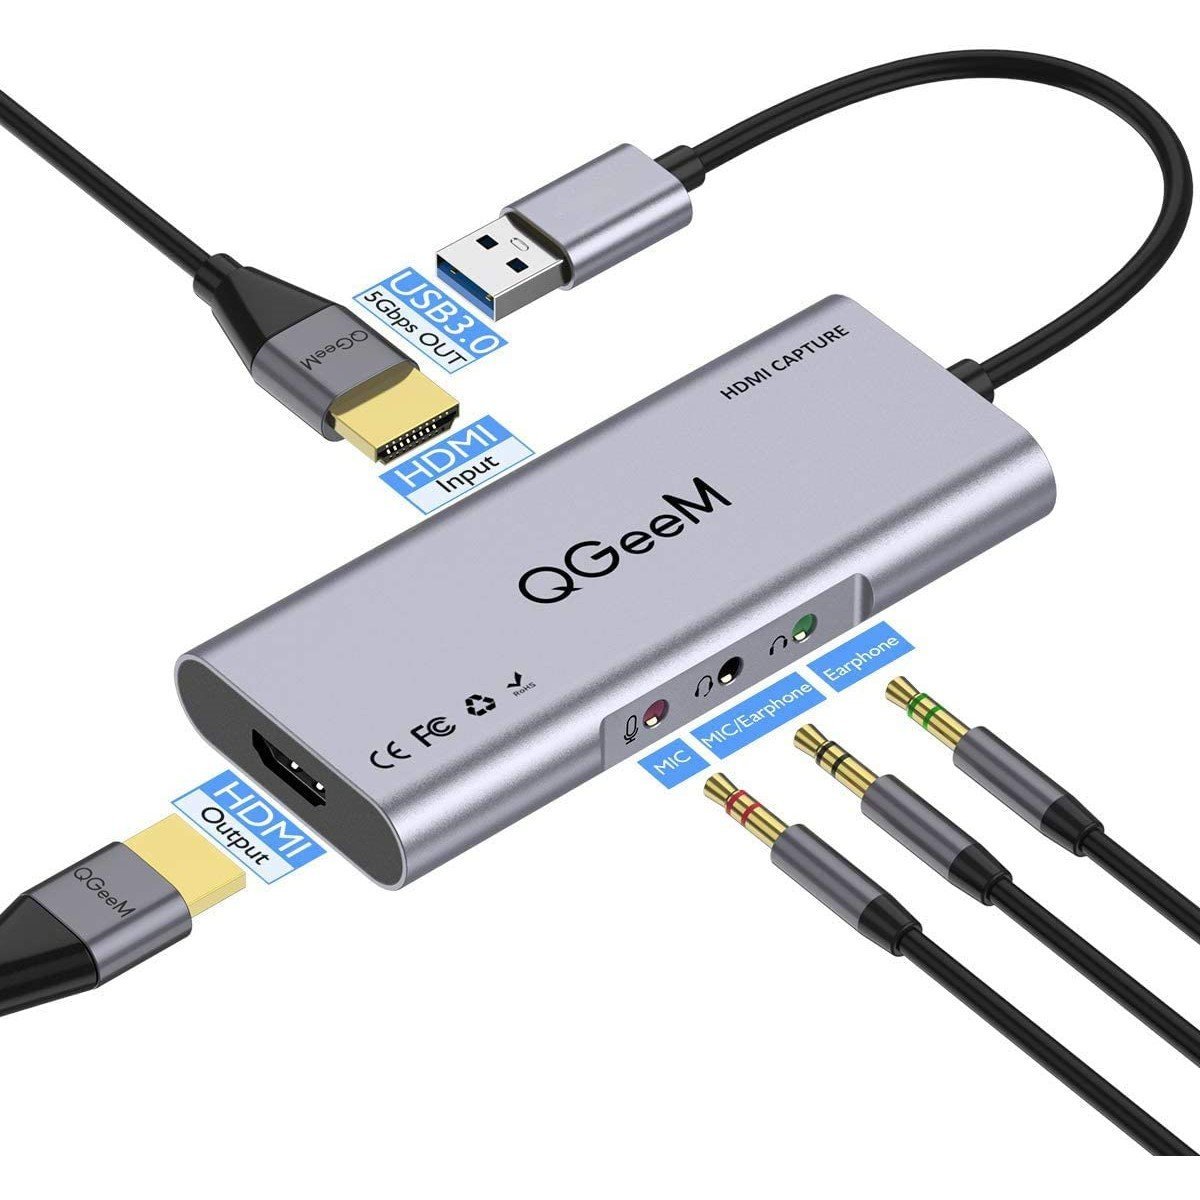 HDMI to USB-C Video Capture Adapter